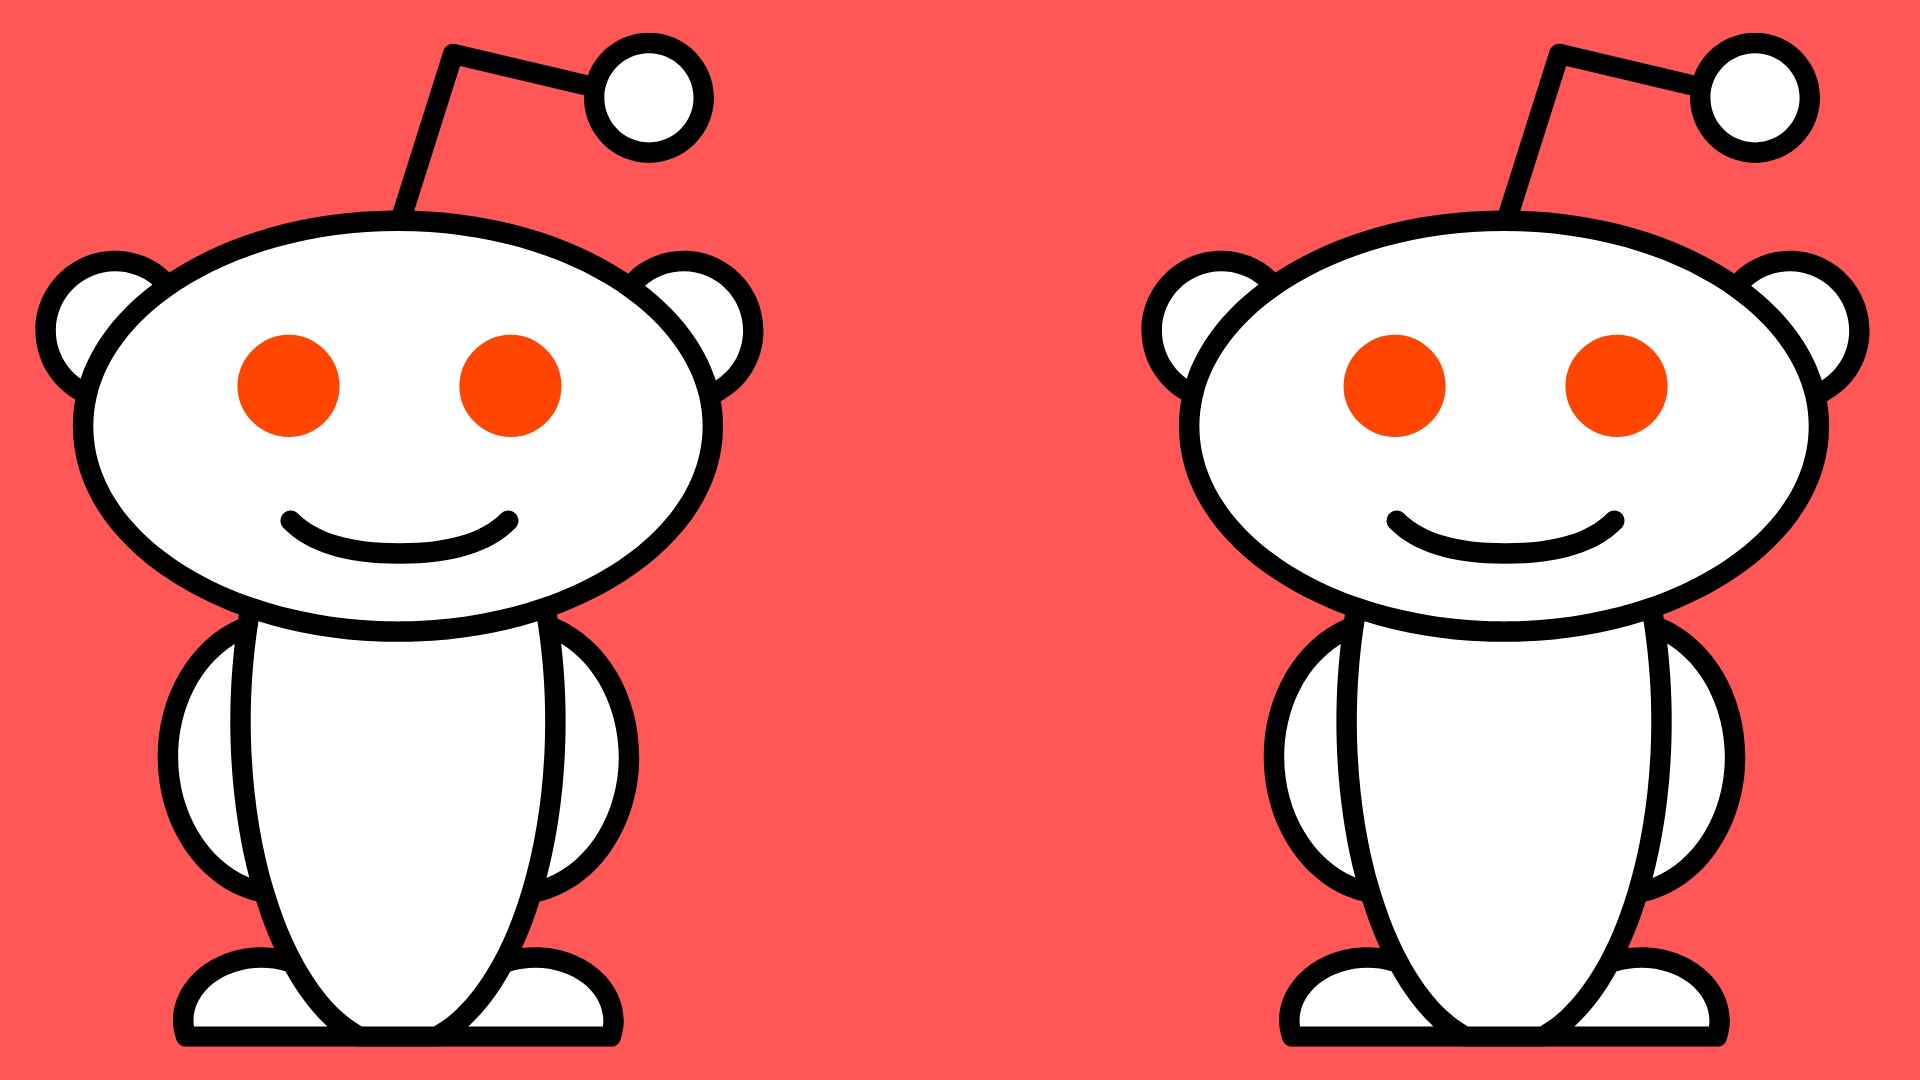 Can you use Reddit to learn new skills or gain knowledge in specific areas?